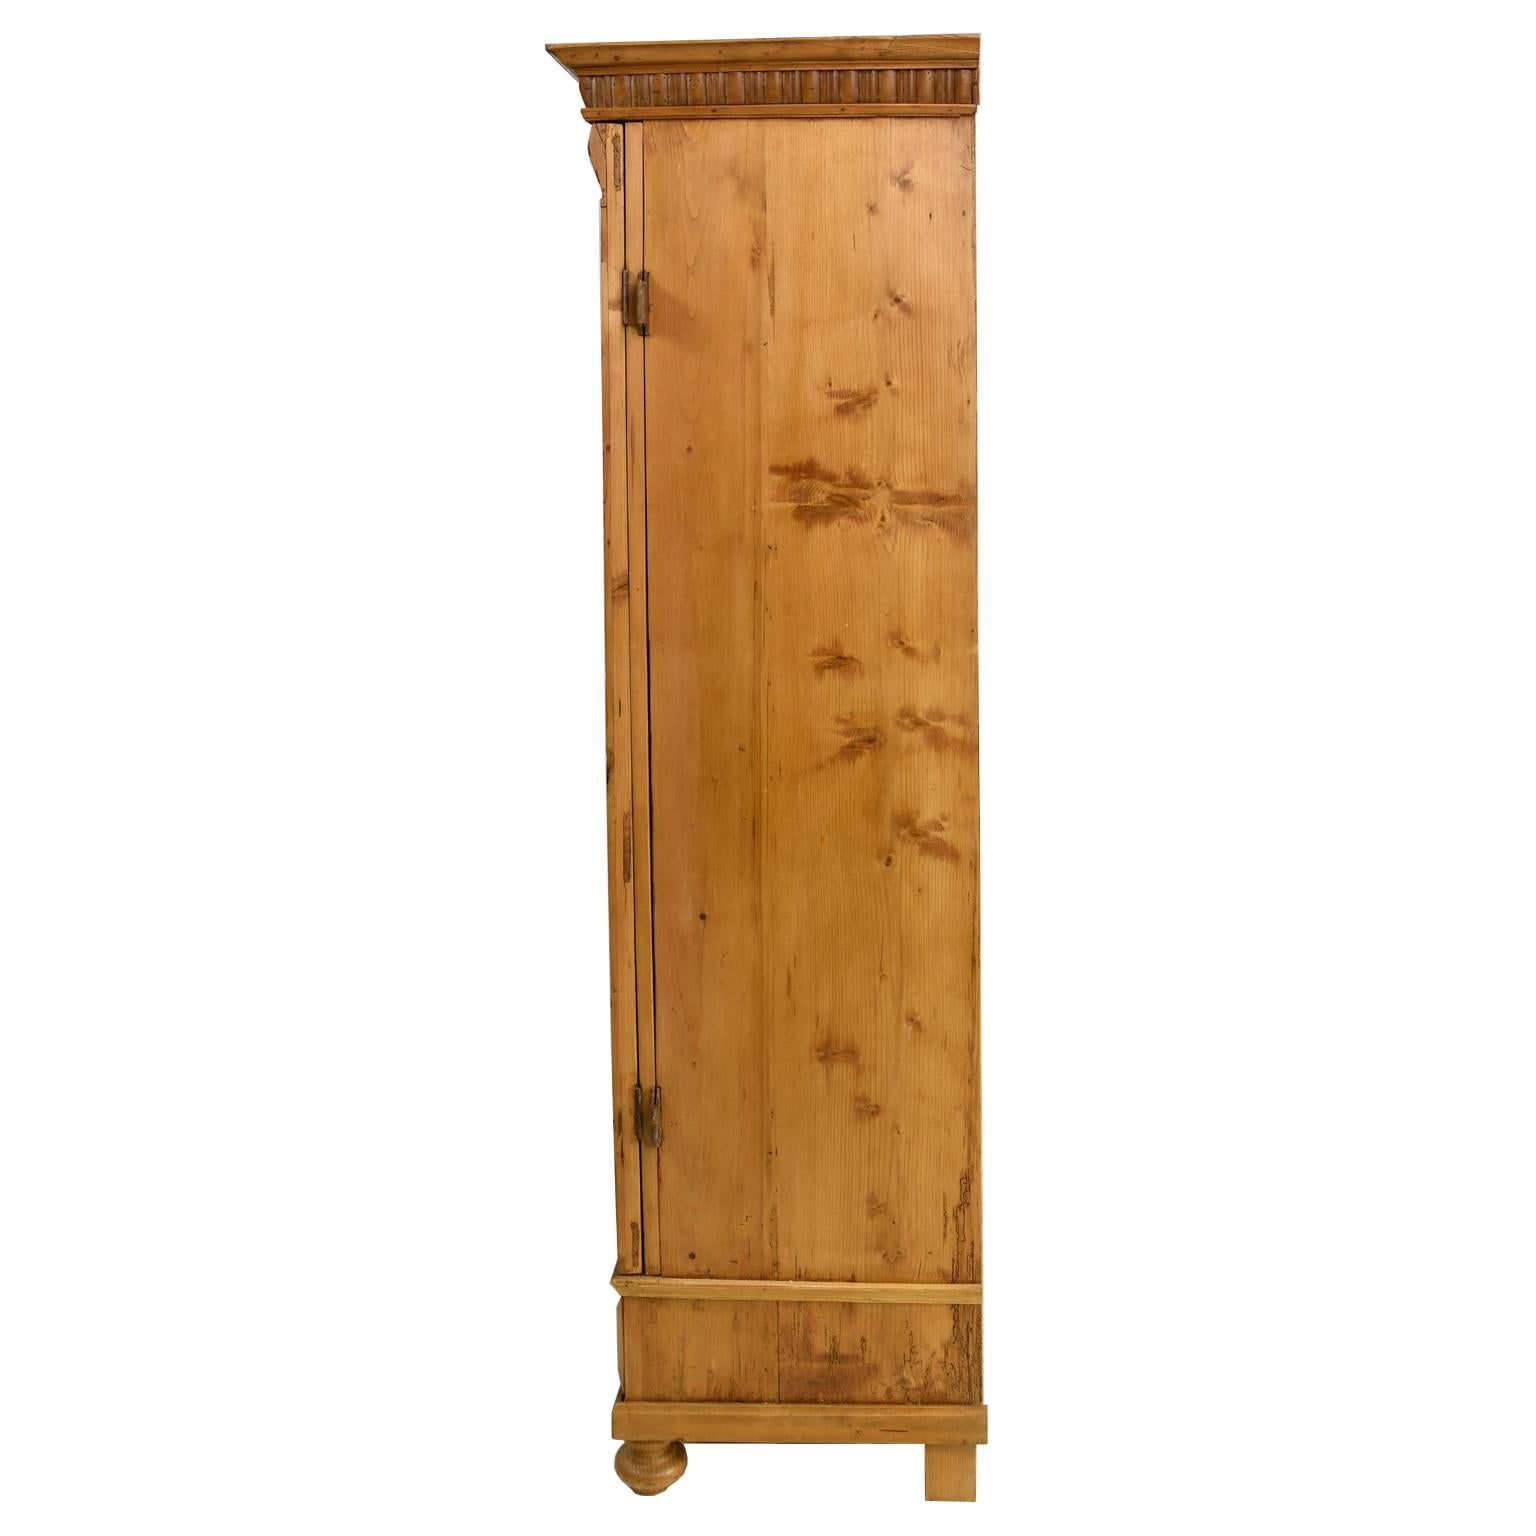 Austrian/ Hungarian Rustic Pine Armoire, circa 1840 with Parliament Hinges 2